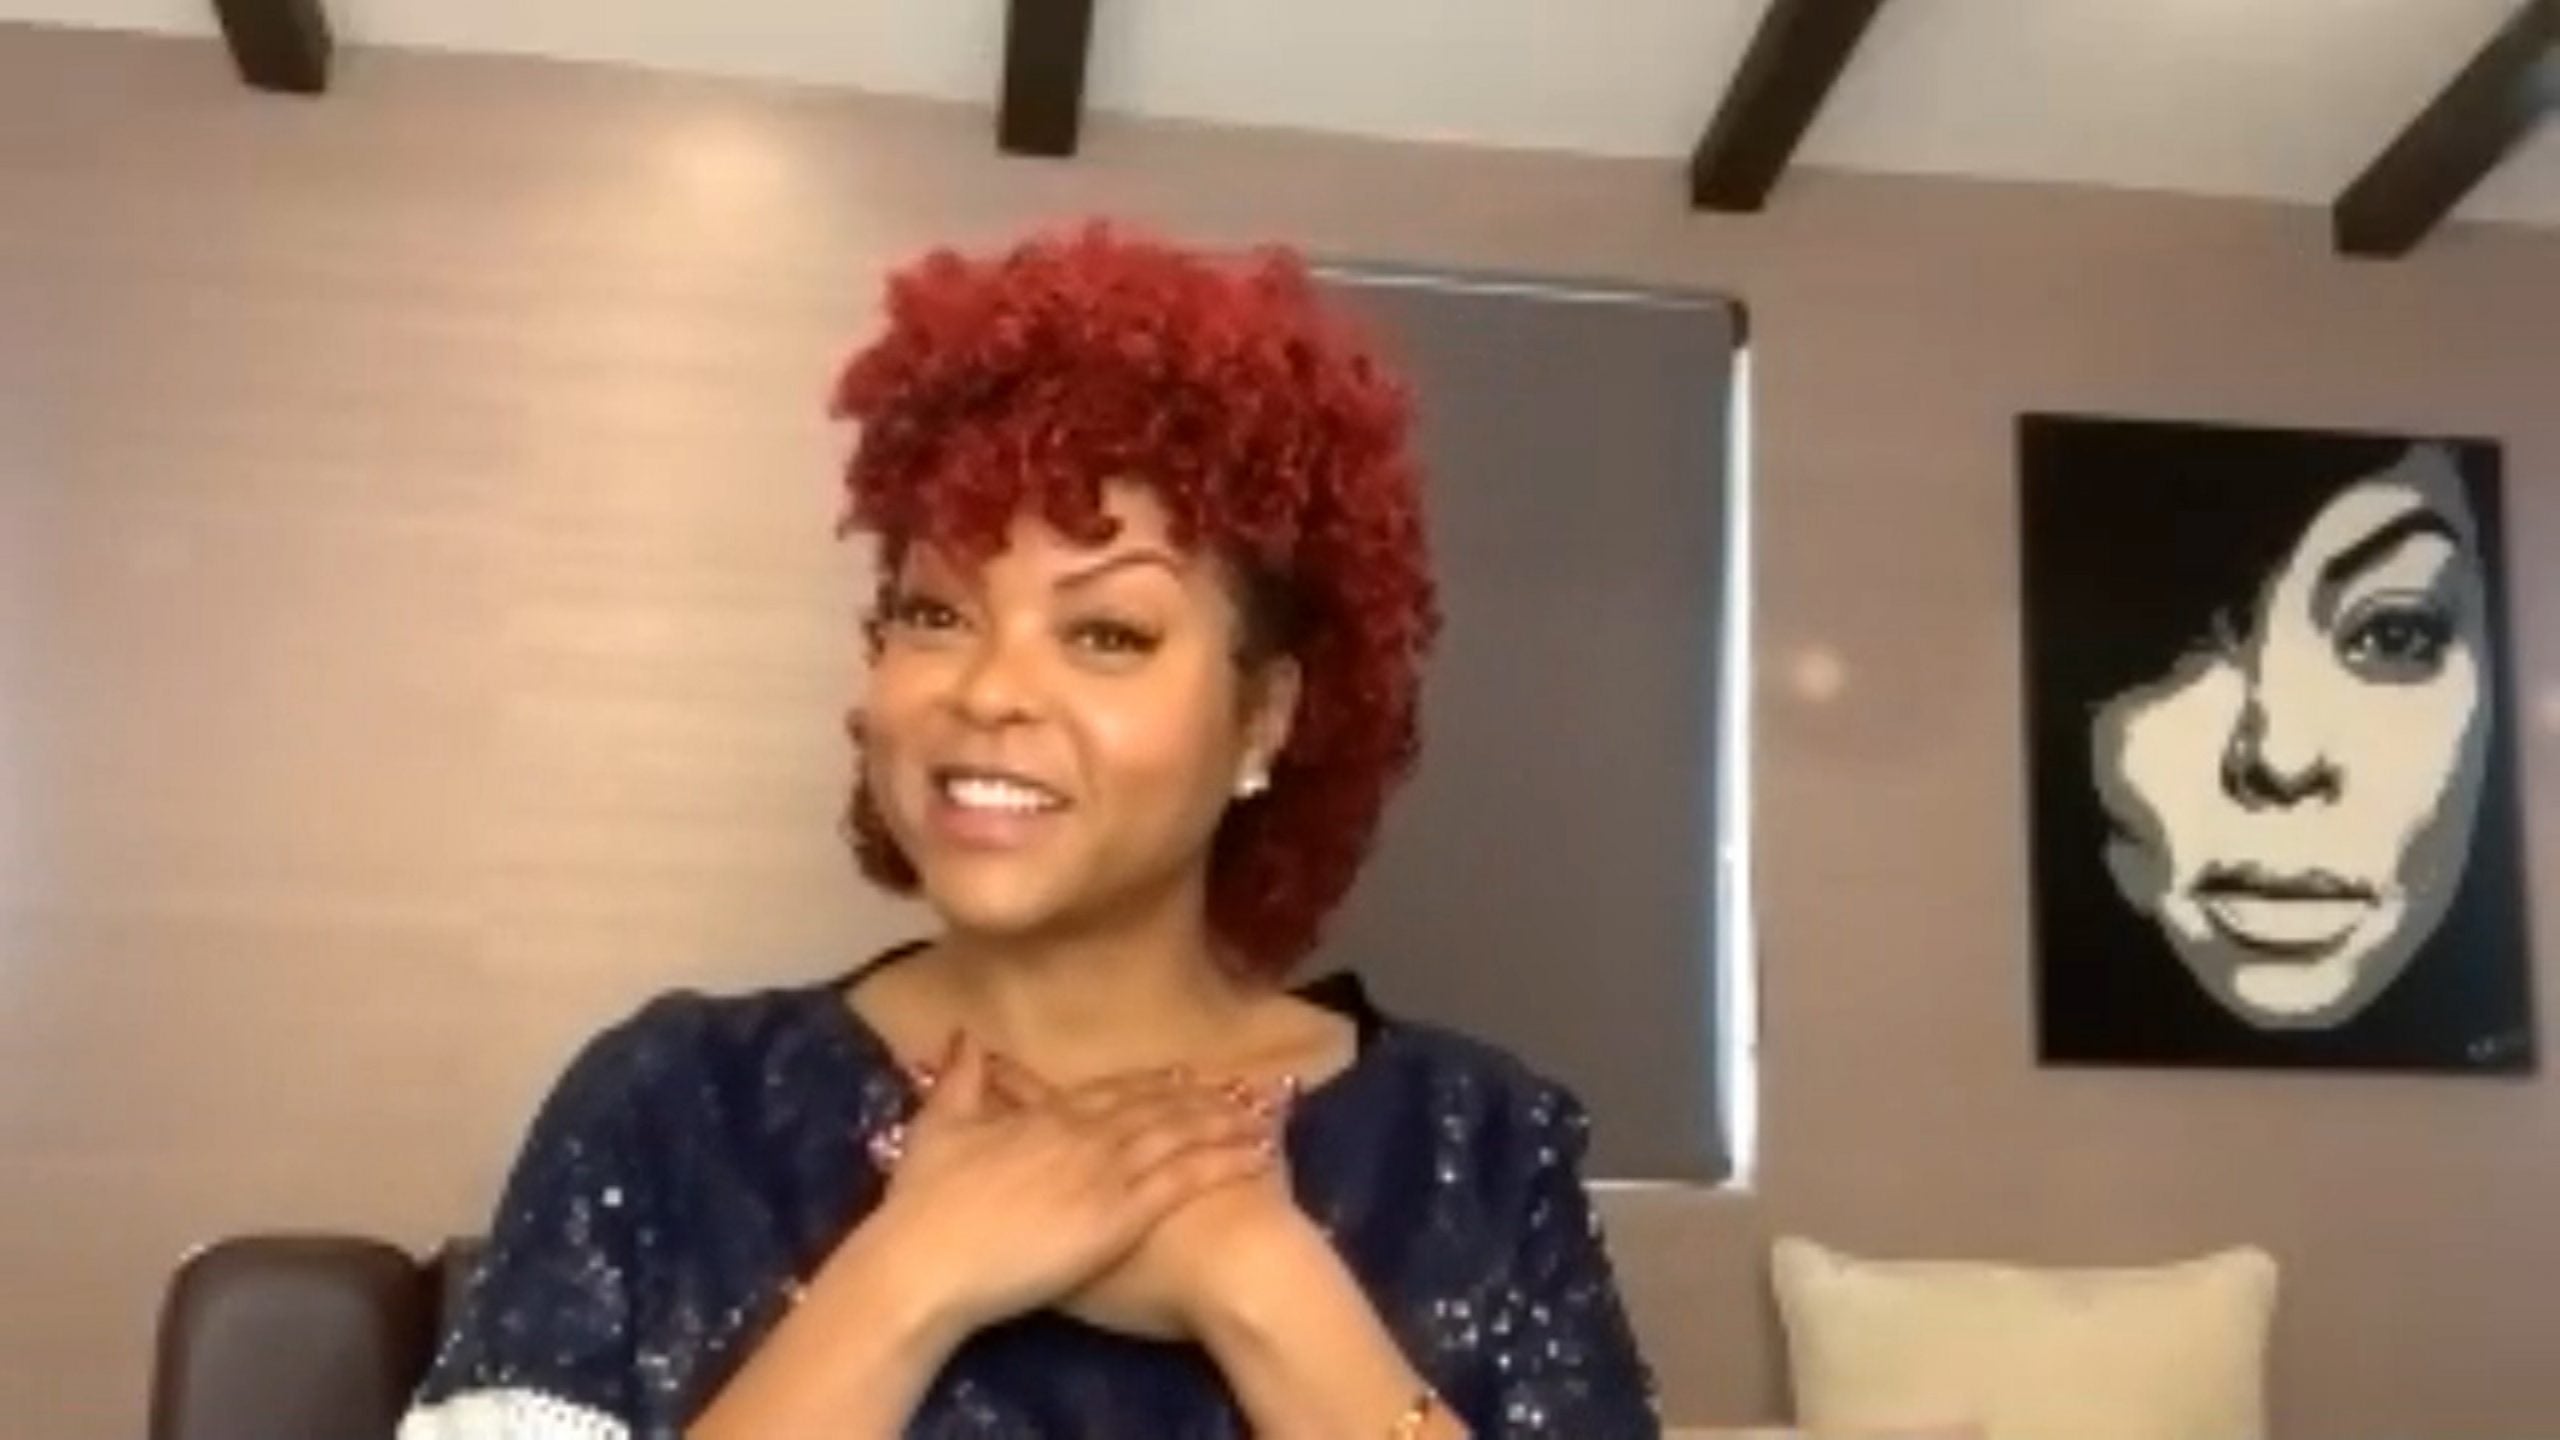 We Loved All The Ways Taraji P. Henson Rocked Red Hair In 2020